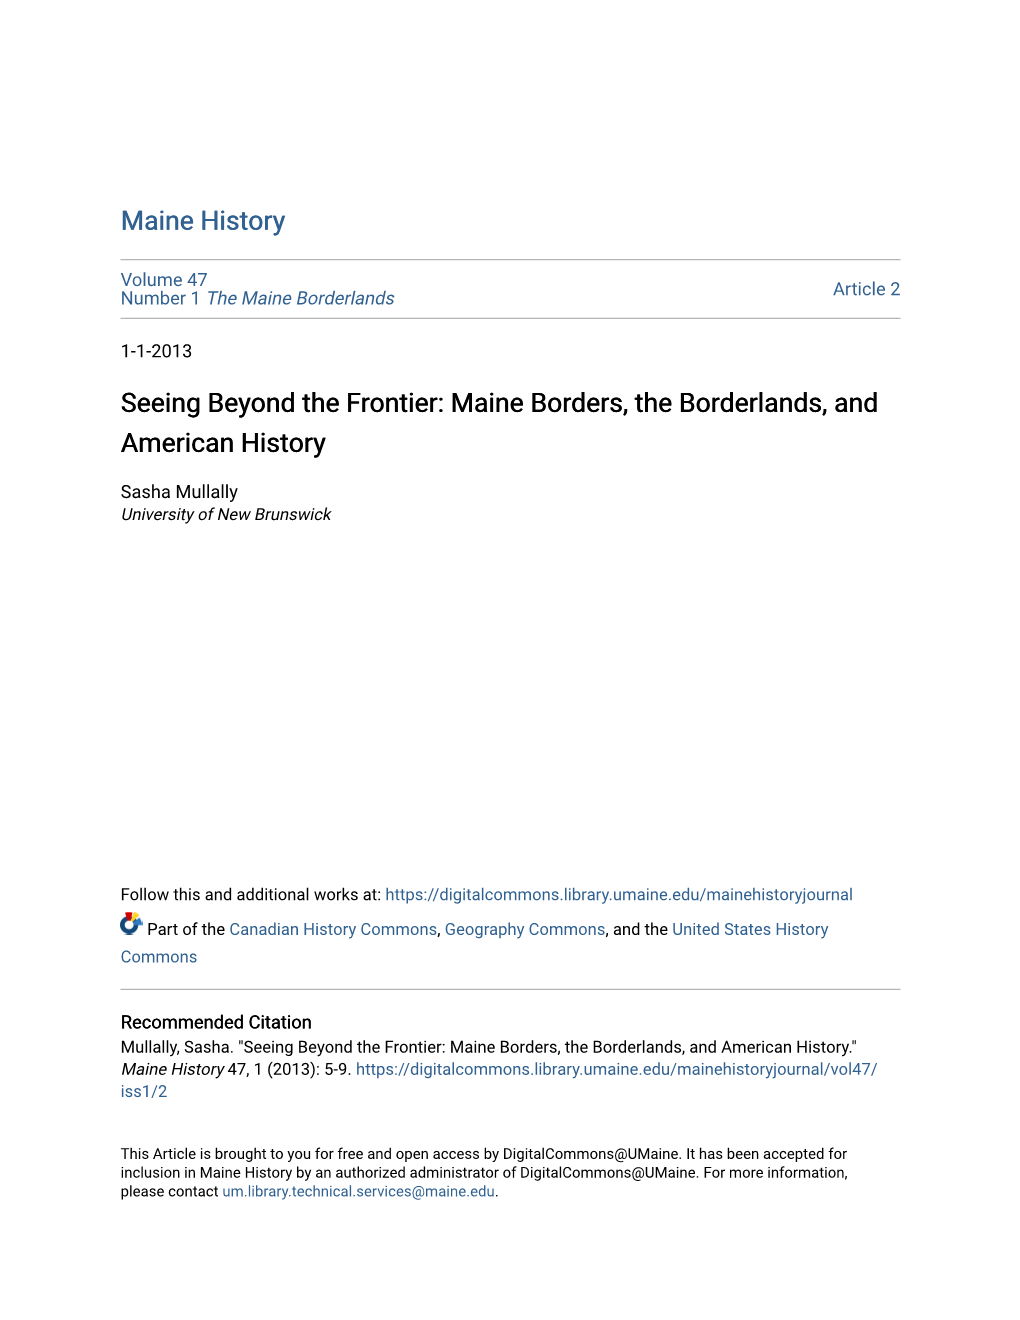 Seeing Beyond the Frontier: Maine Borders, the Borderlands, and American History